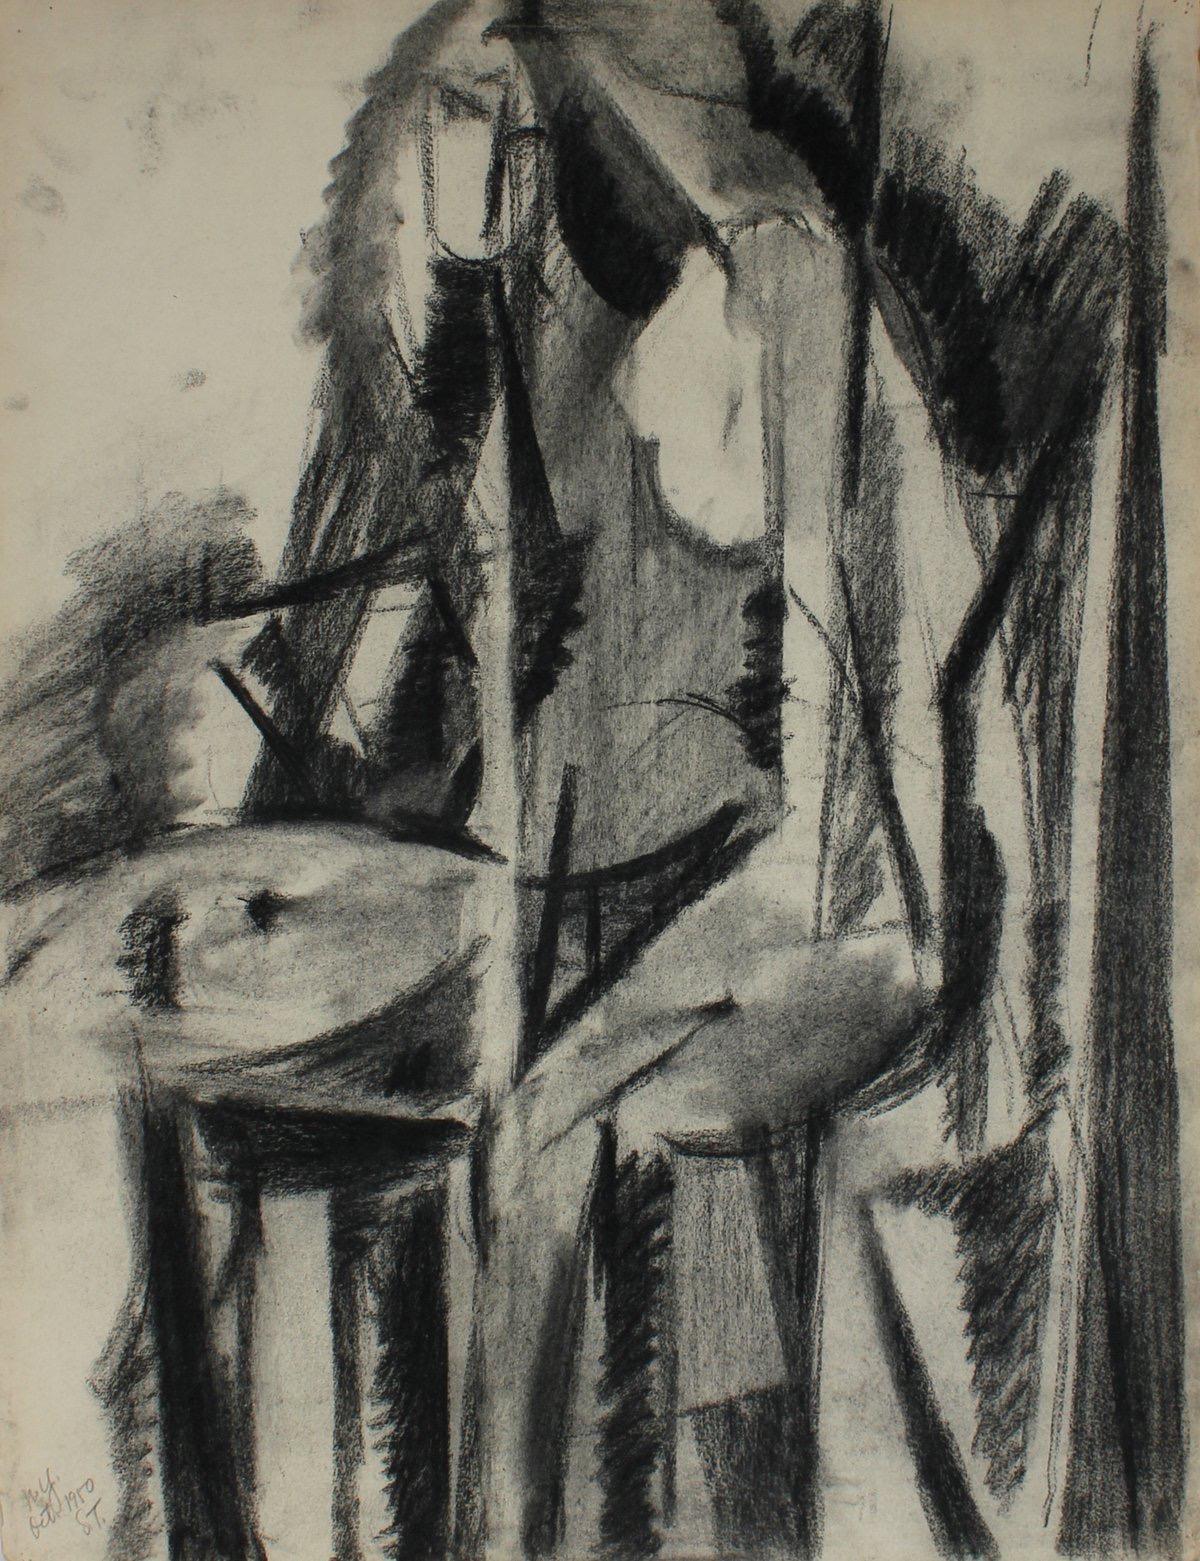 Seymour Tubis Figurative Art - Abstracted Linear Figure October 1950 Charcoal on Paper